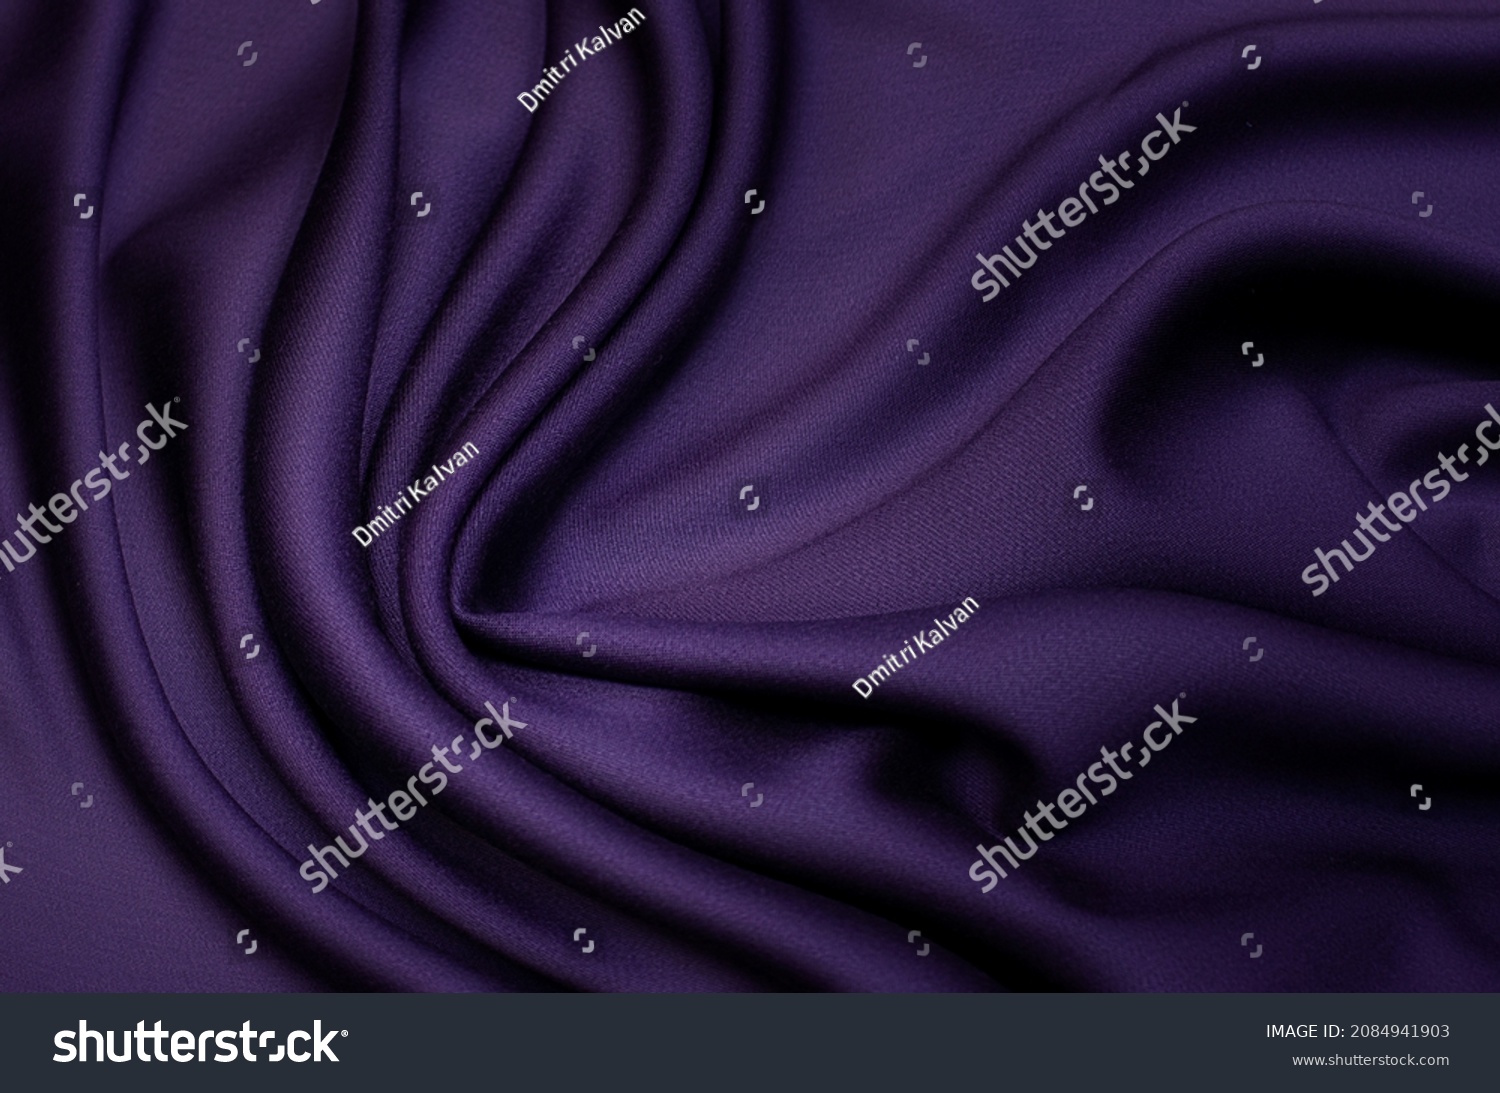 Abstract background texture of natural violet, purple or lilac color fabric. Fabric texture of natural cotton or linen, silk or satin, wool or jersey textile material. Luxurious modern canvas textile. #2084941903